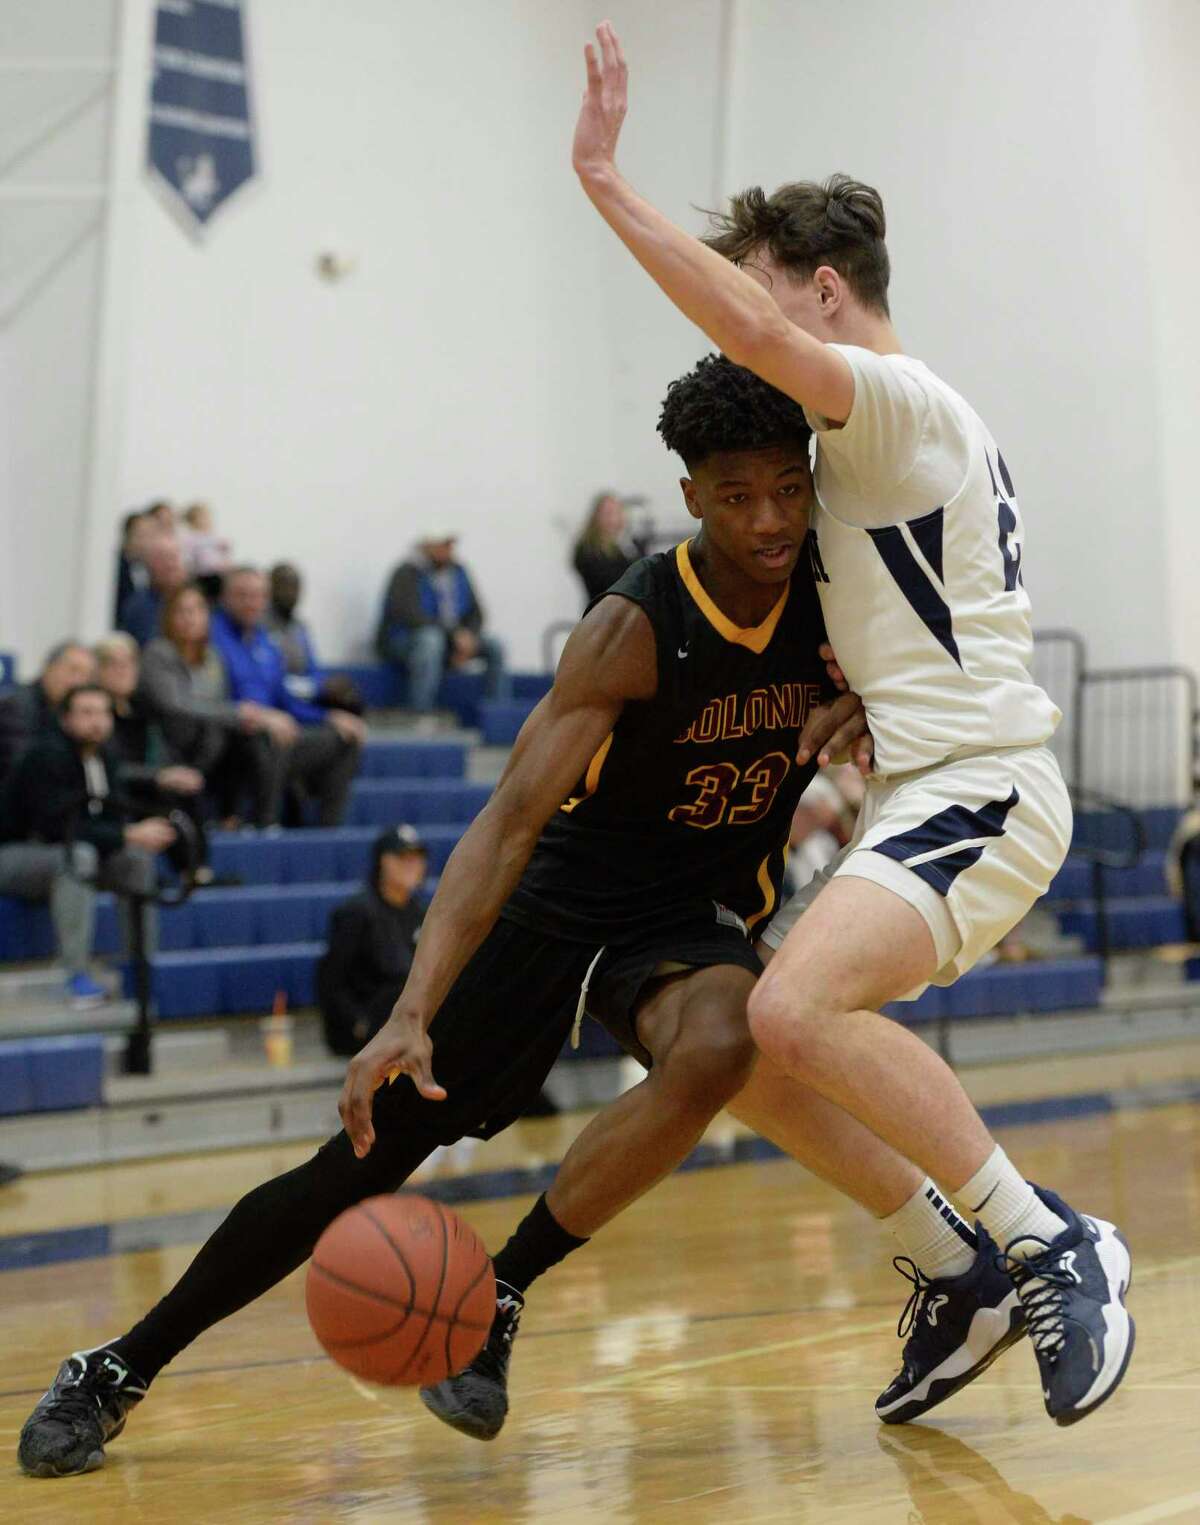 Mekeel Christian Caleb Hussey pressures South Colonie's Trey Von Owens-Cody during a game on Monday, Feb. 13, 2023, at Mekeel Christian Academy in Scotia, N.Y. (Jenn March, Special to the Times Union)